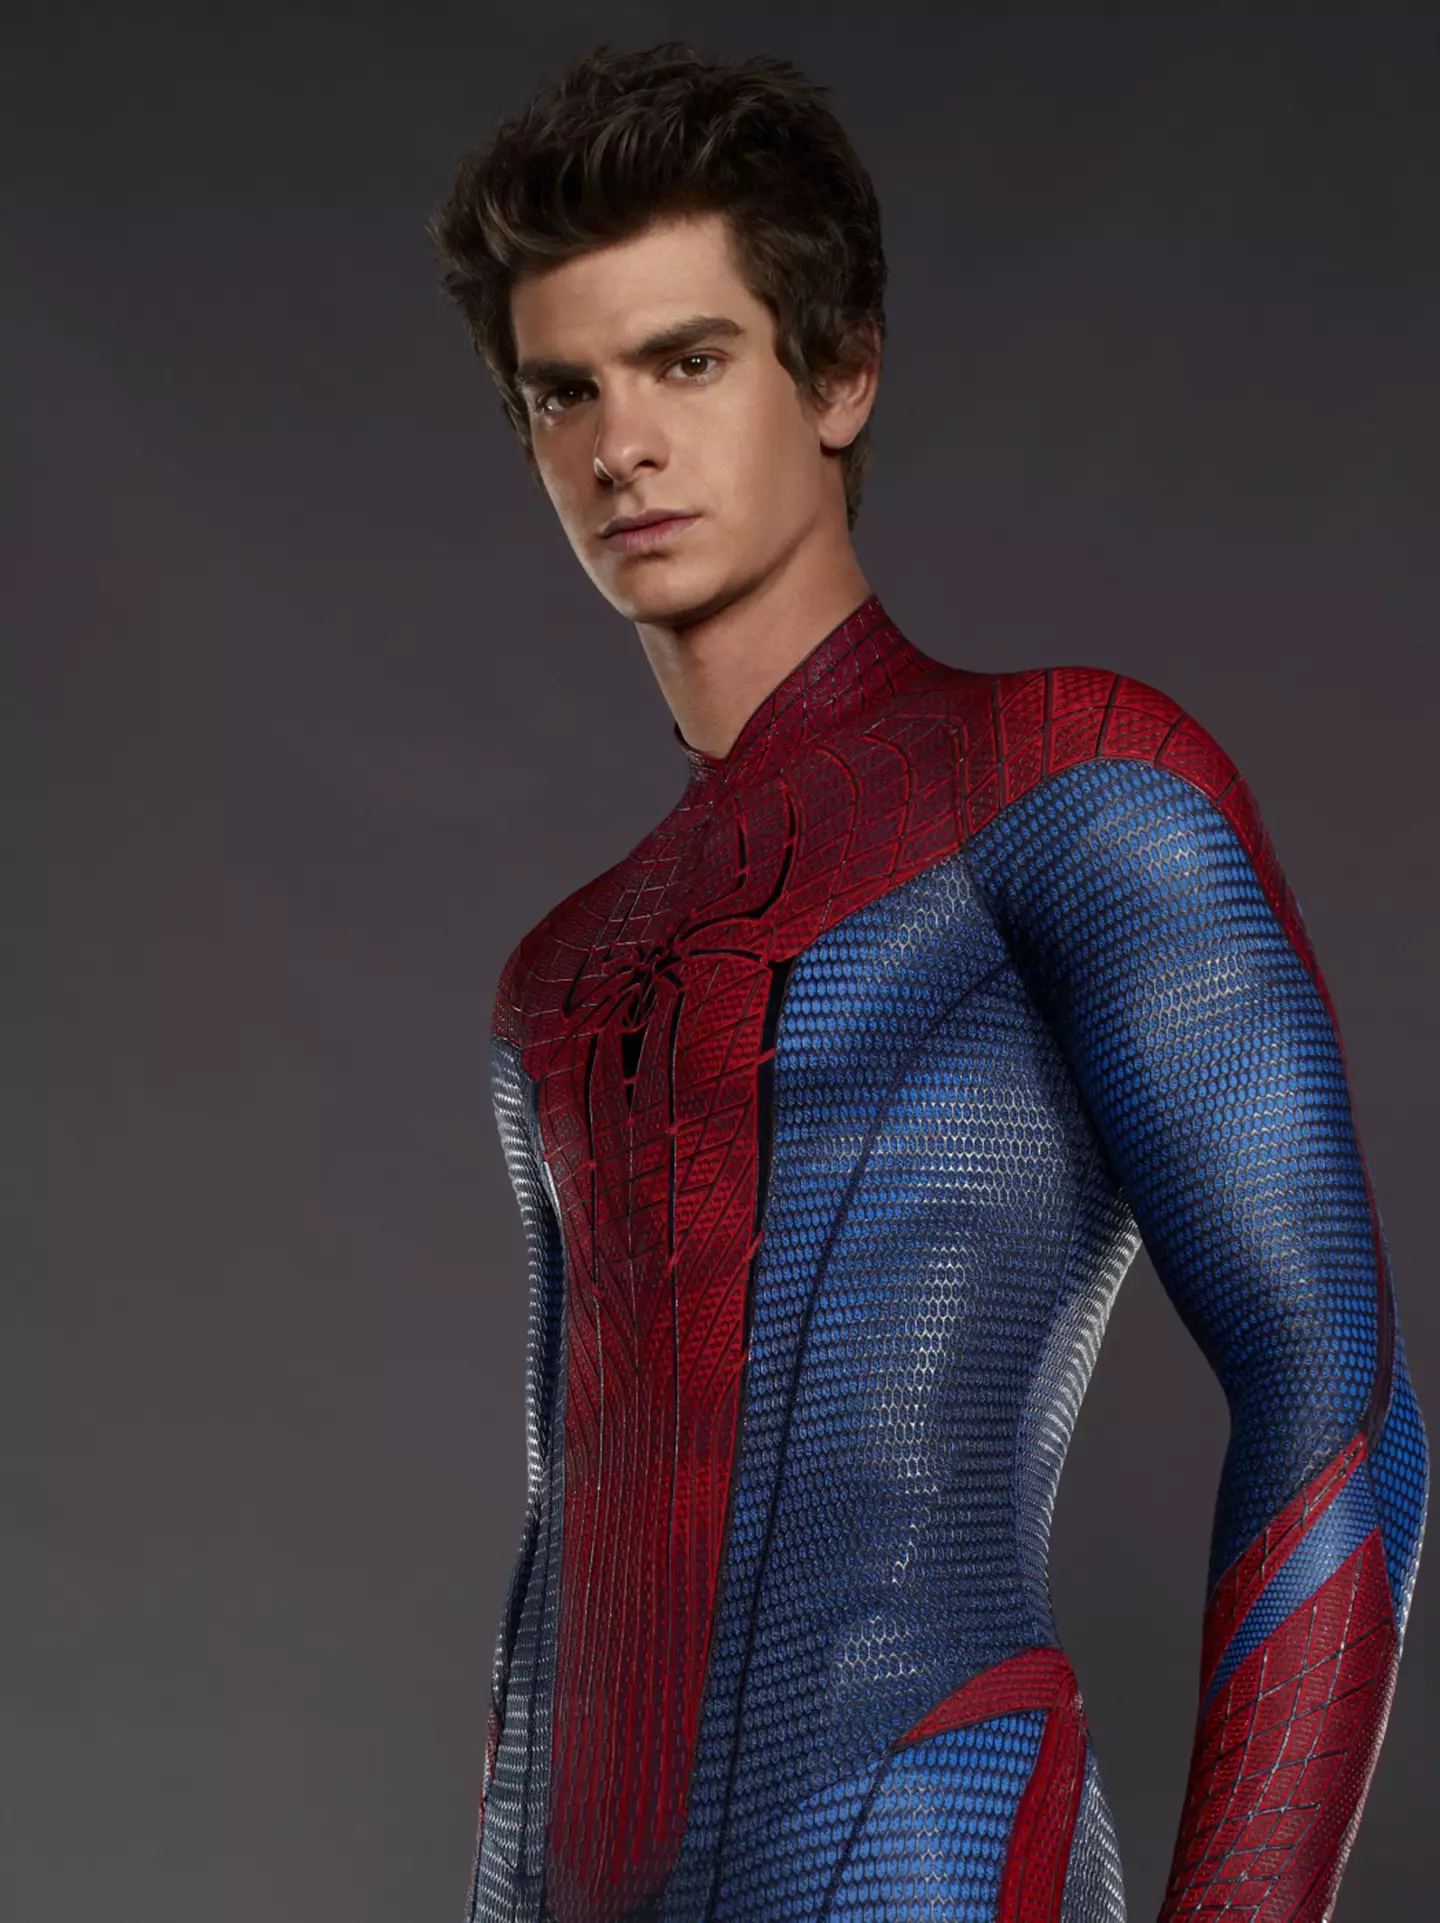 Garfield recently reprised his role as Spider-Man.